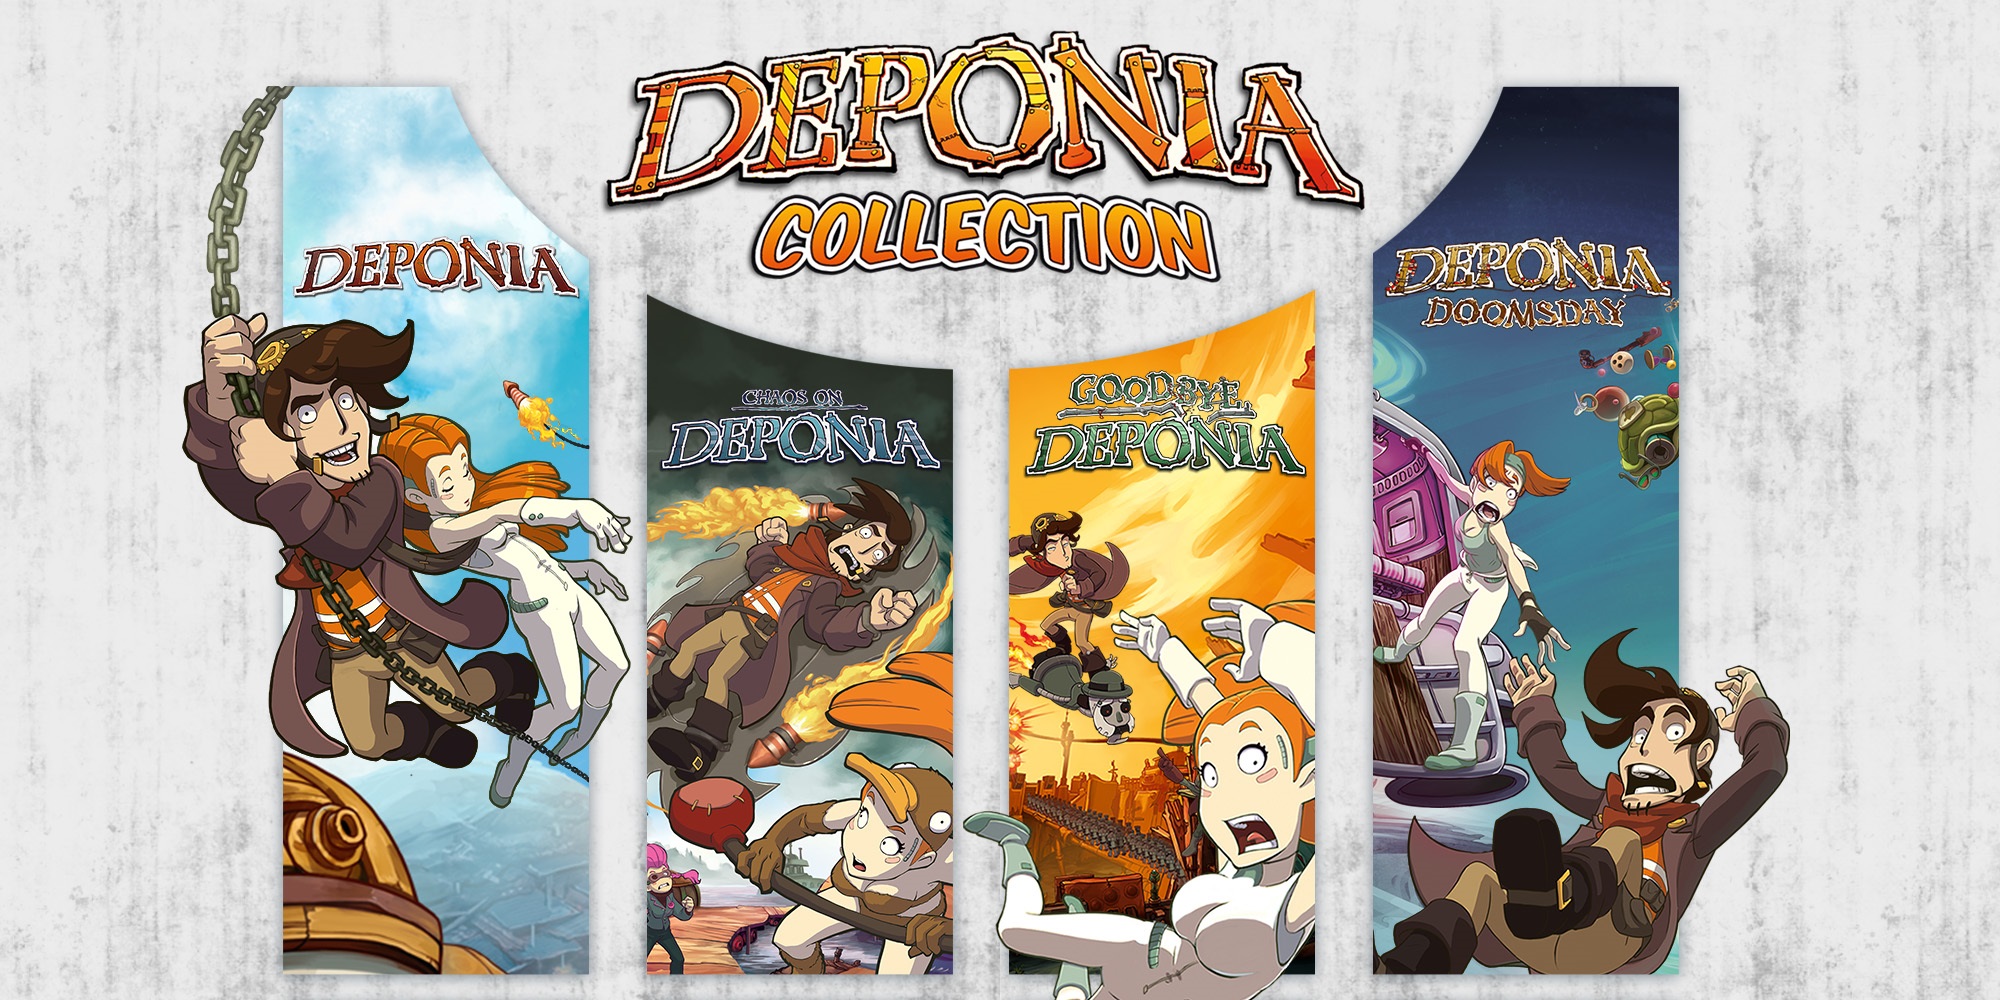 Deponia Full Scrap Collection Steam CD Key, $7.9